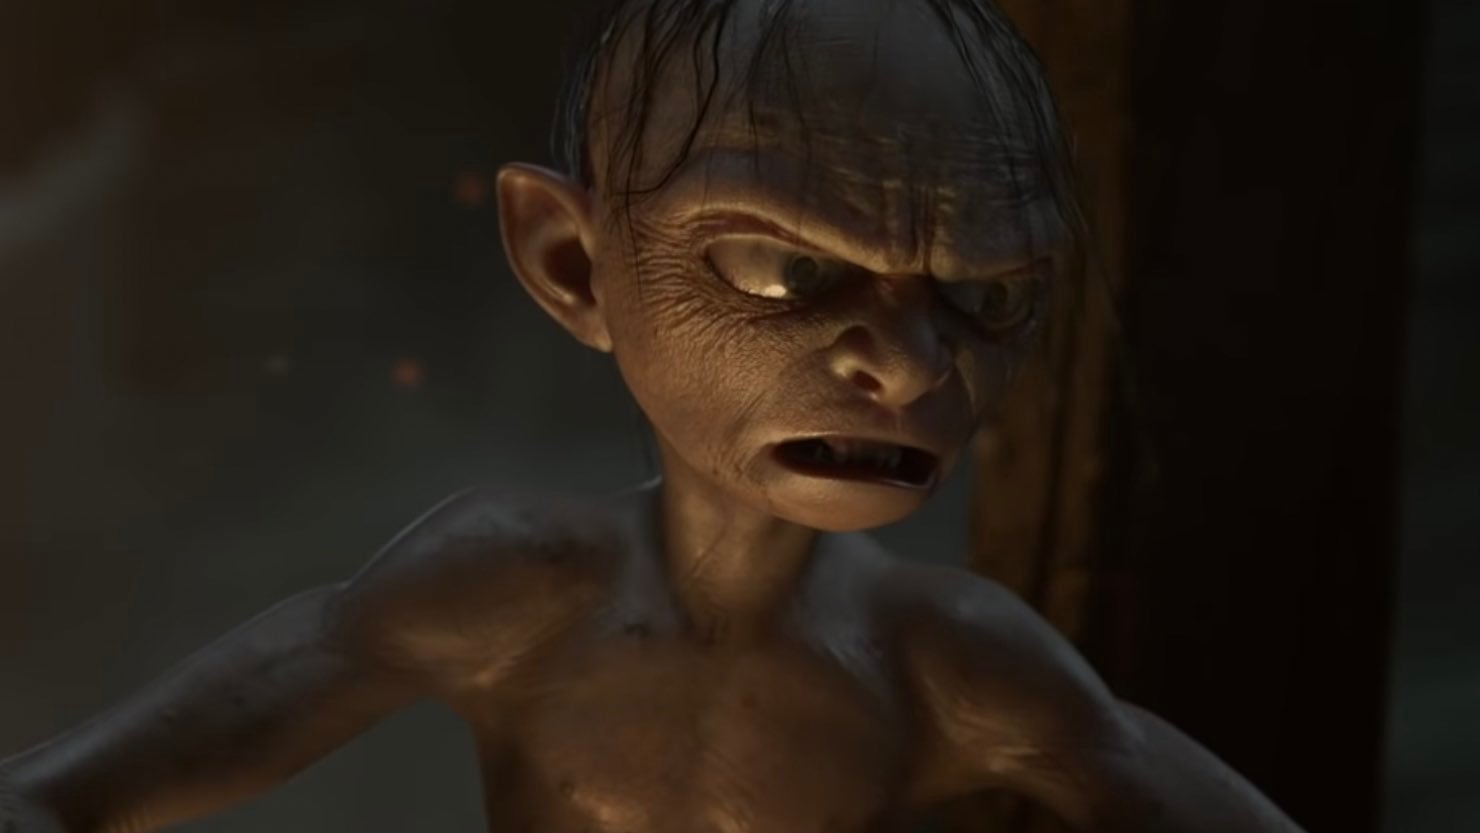 image of gollum from lord of the rings